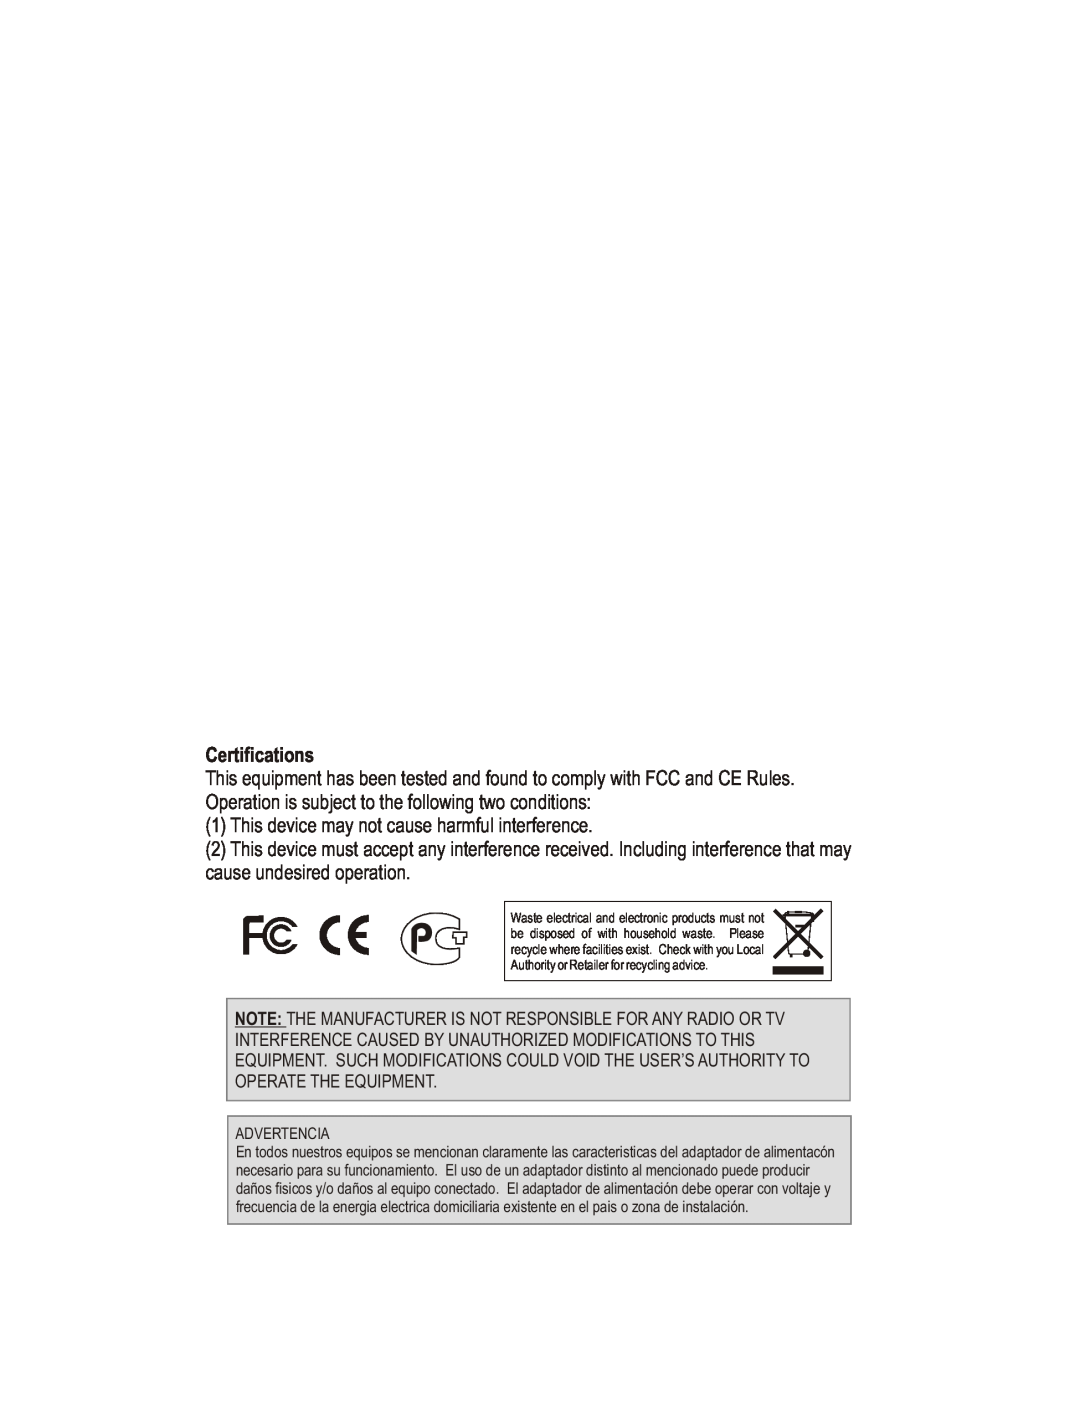 TRENDnet TEW-632BRP manual Certifications, This device may not cause harmful interference 